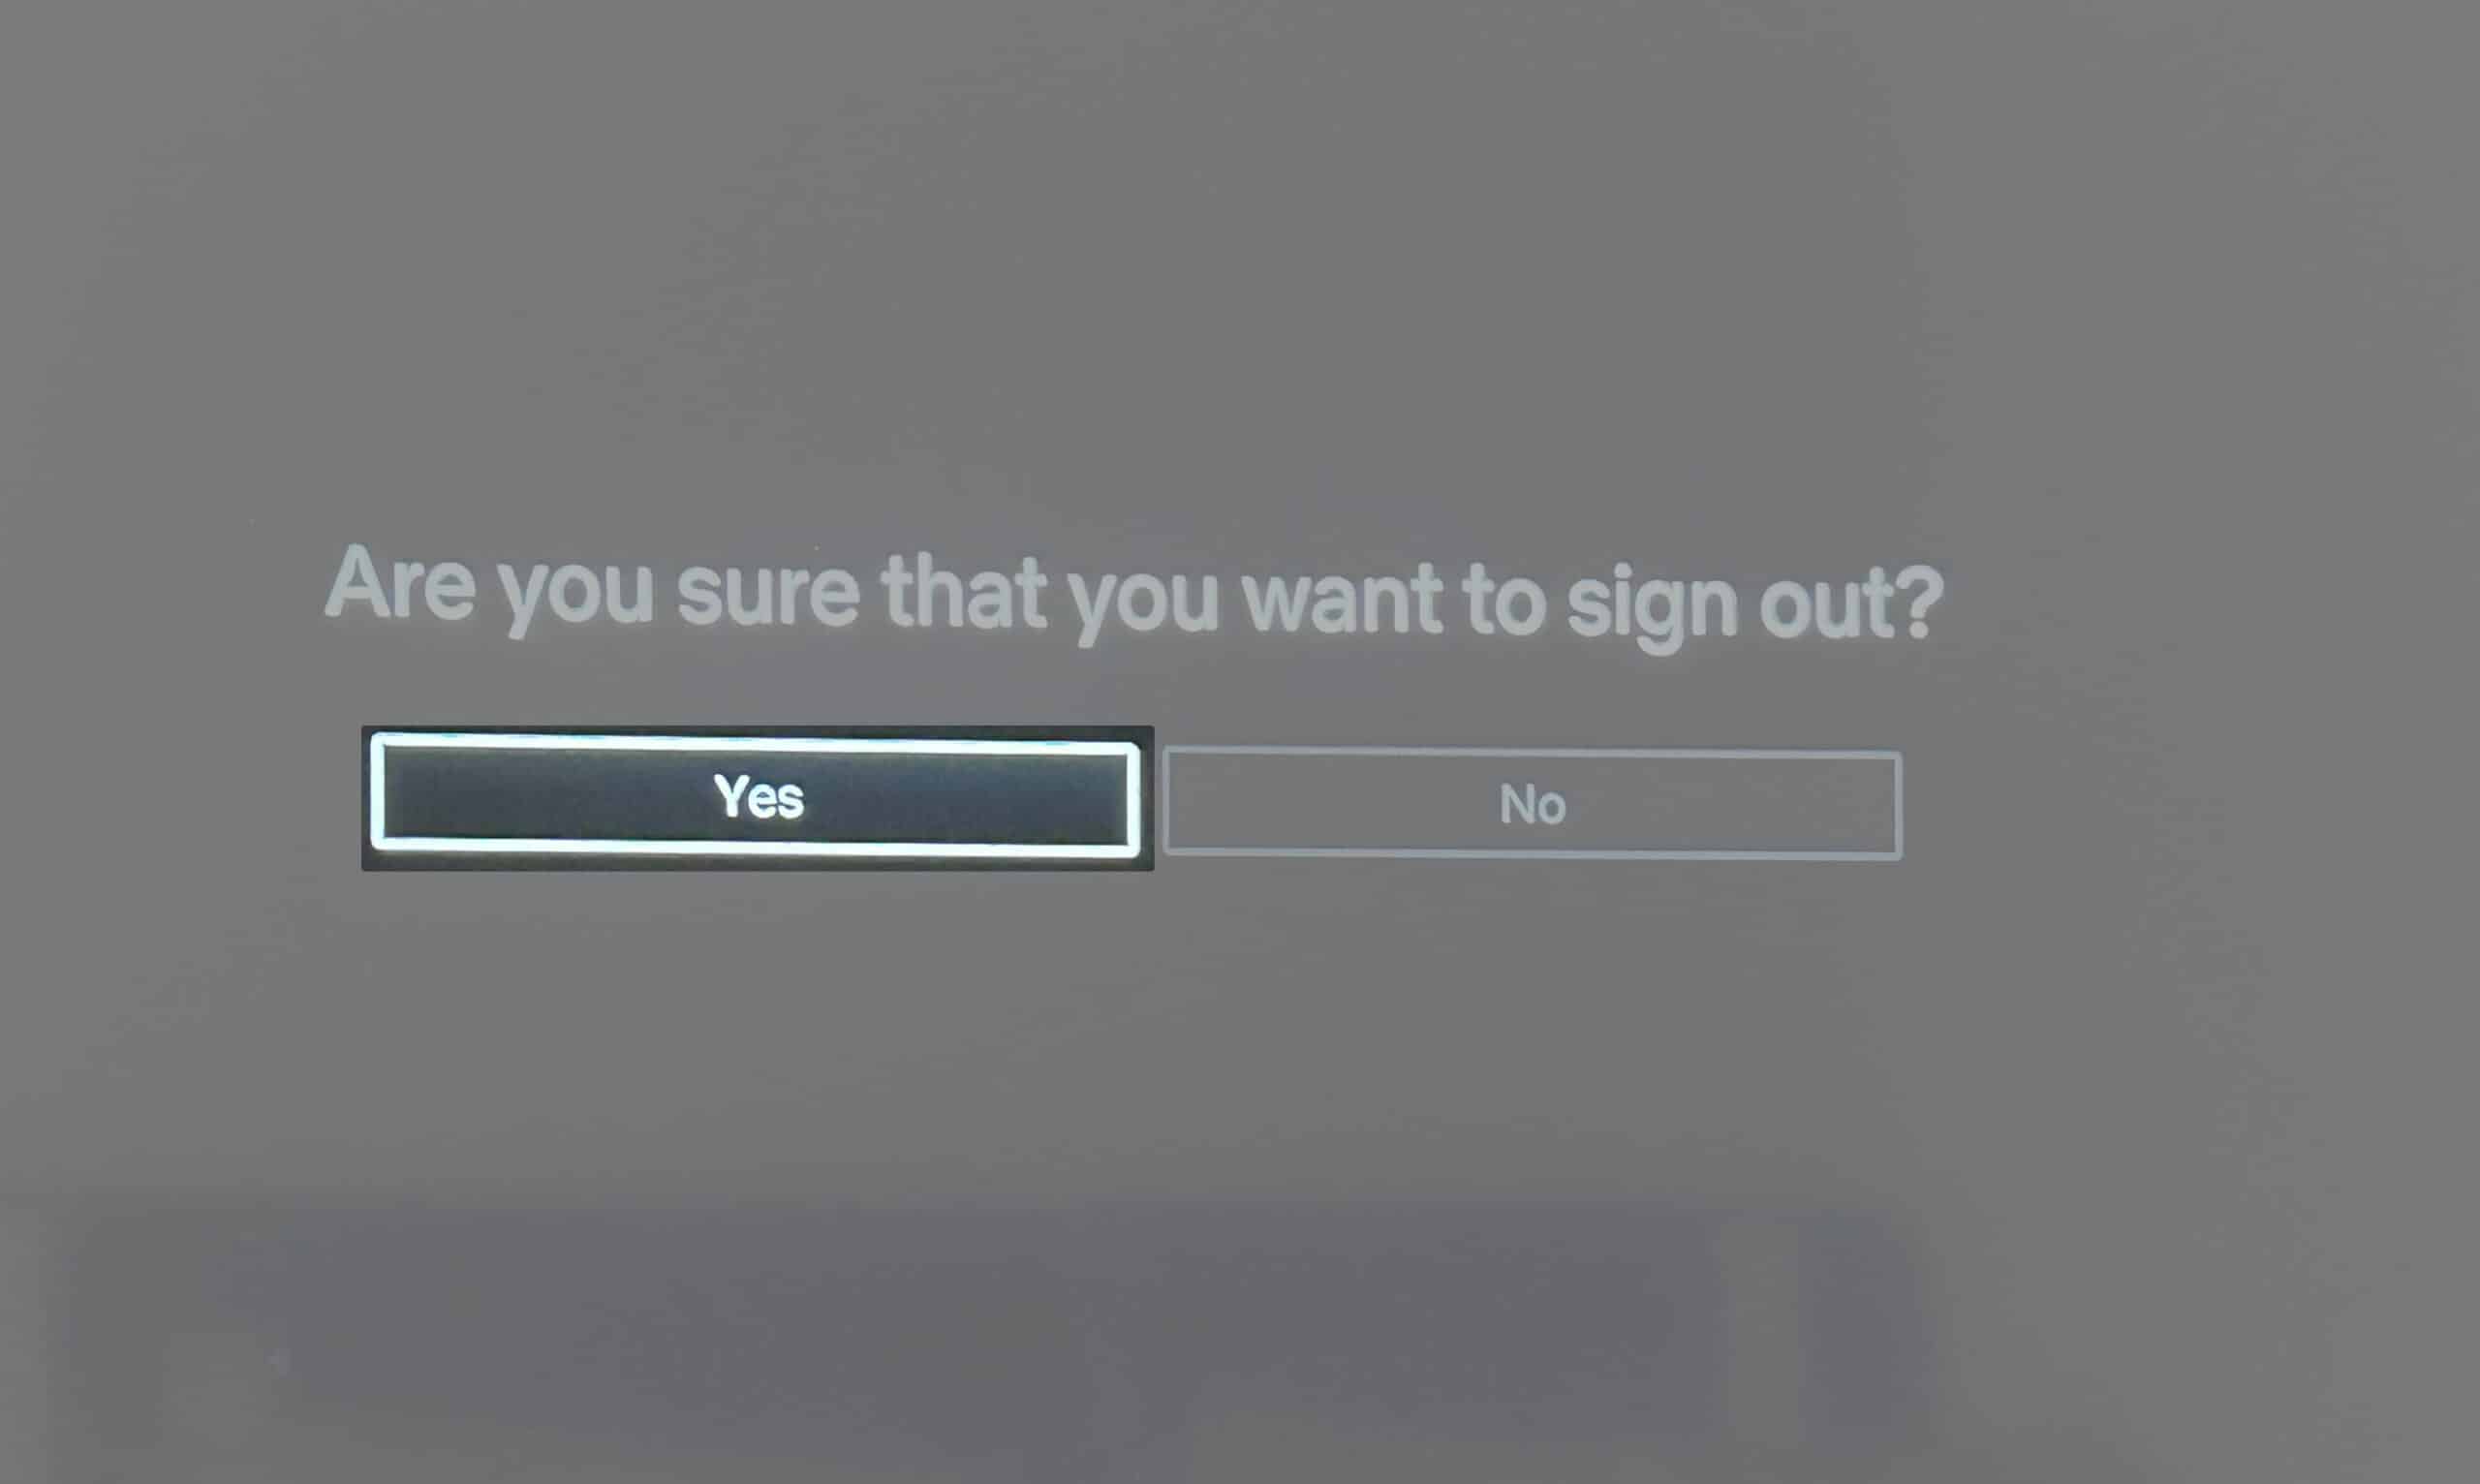 Yes to Sign out from Netflix on Smart TV